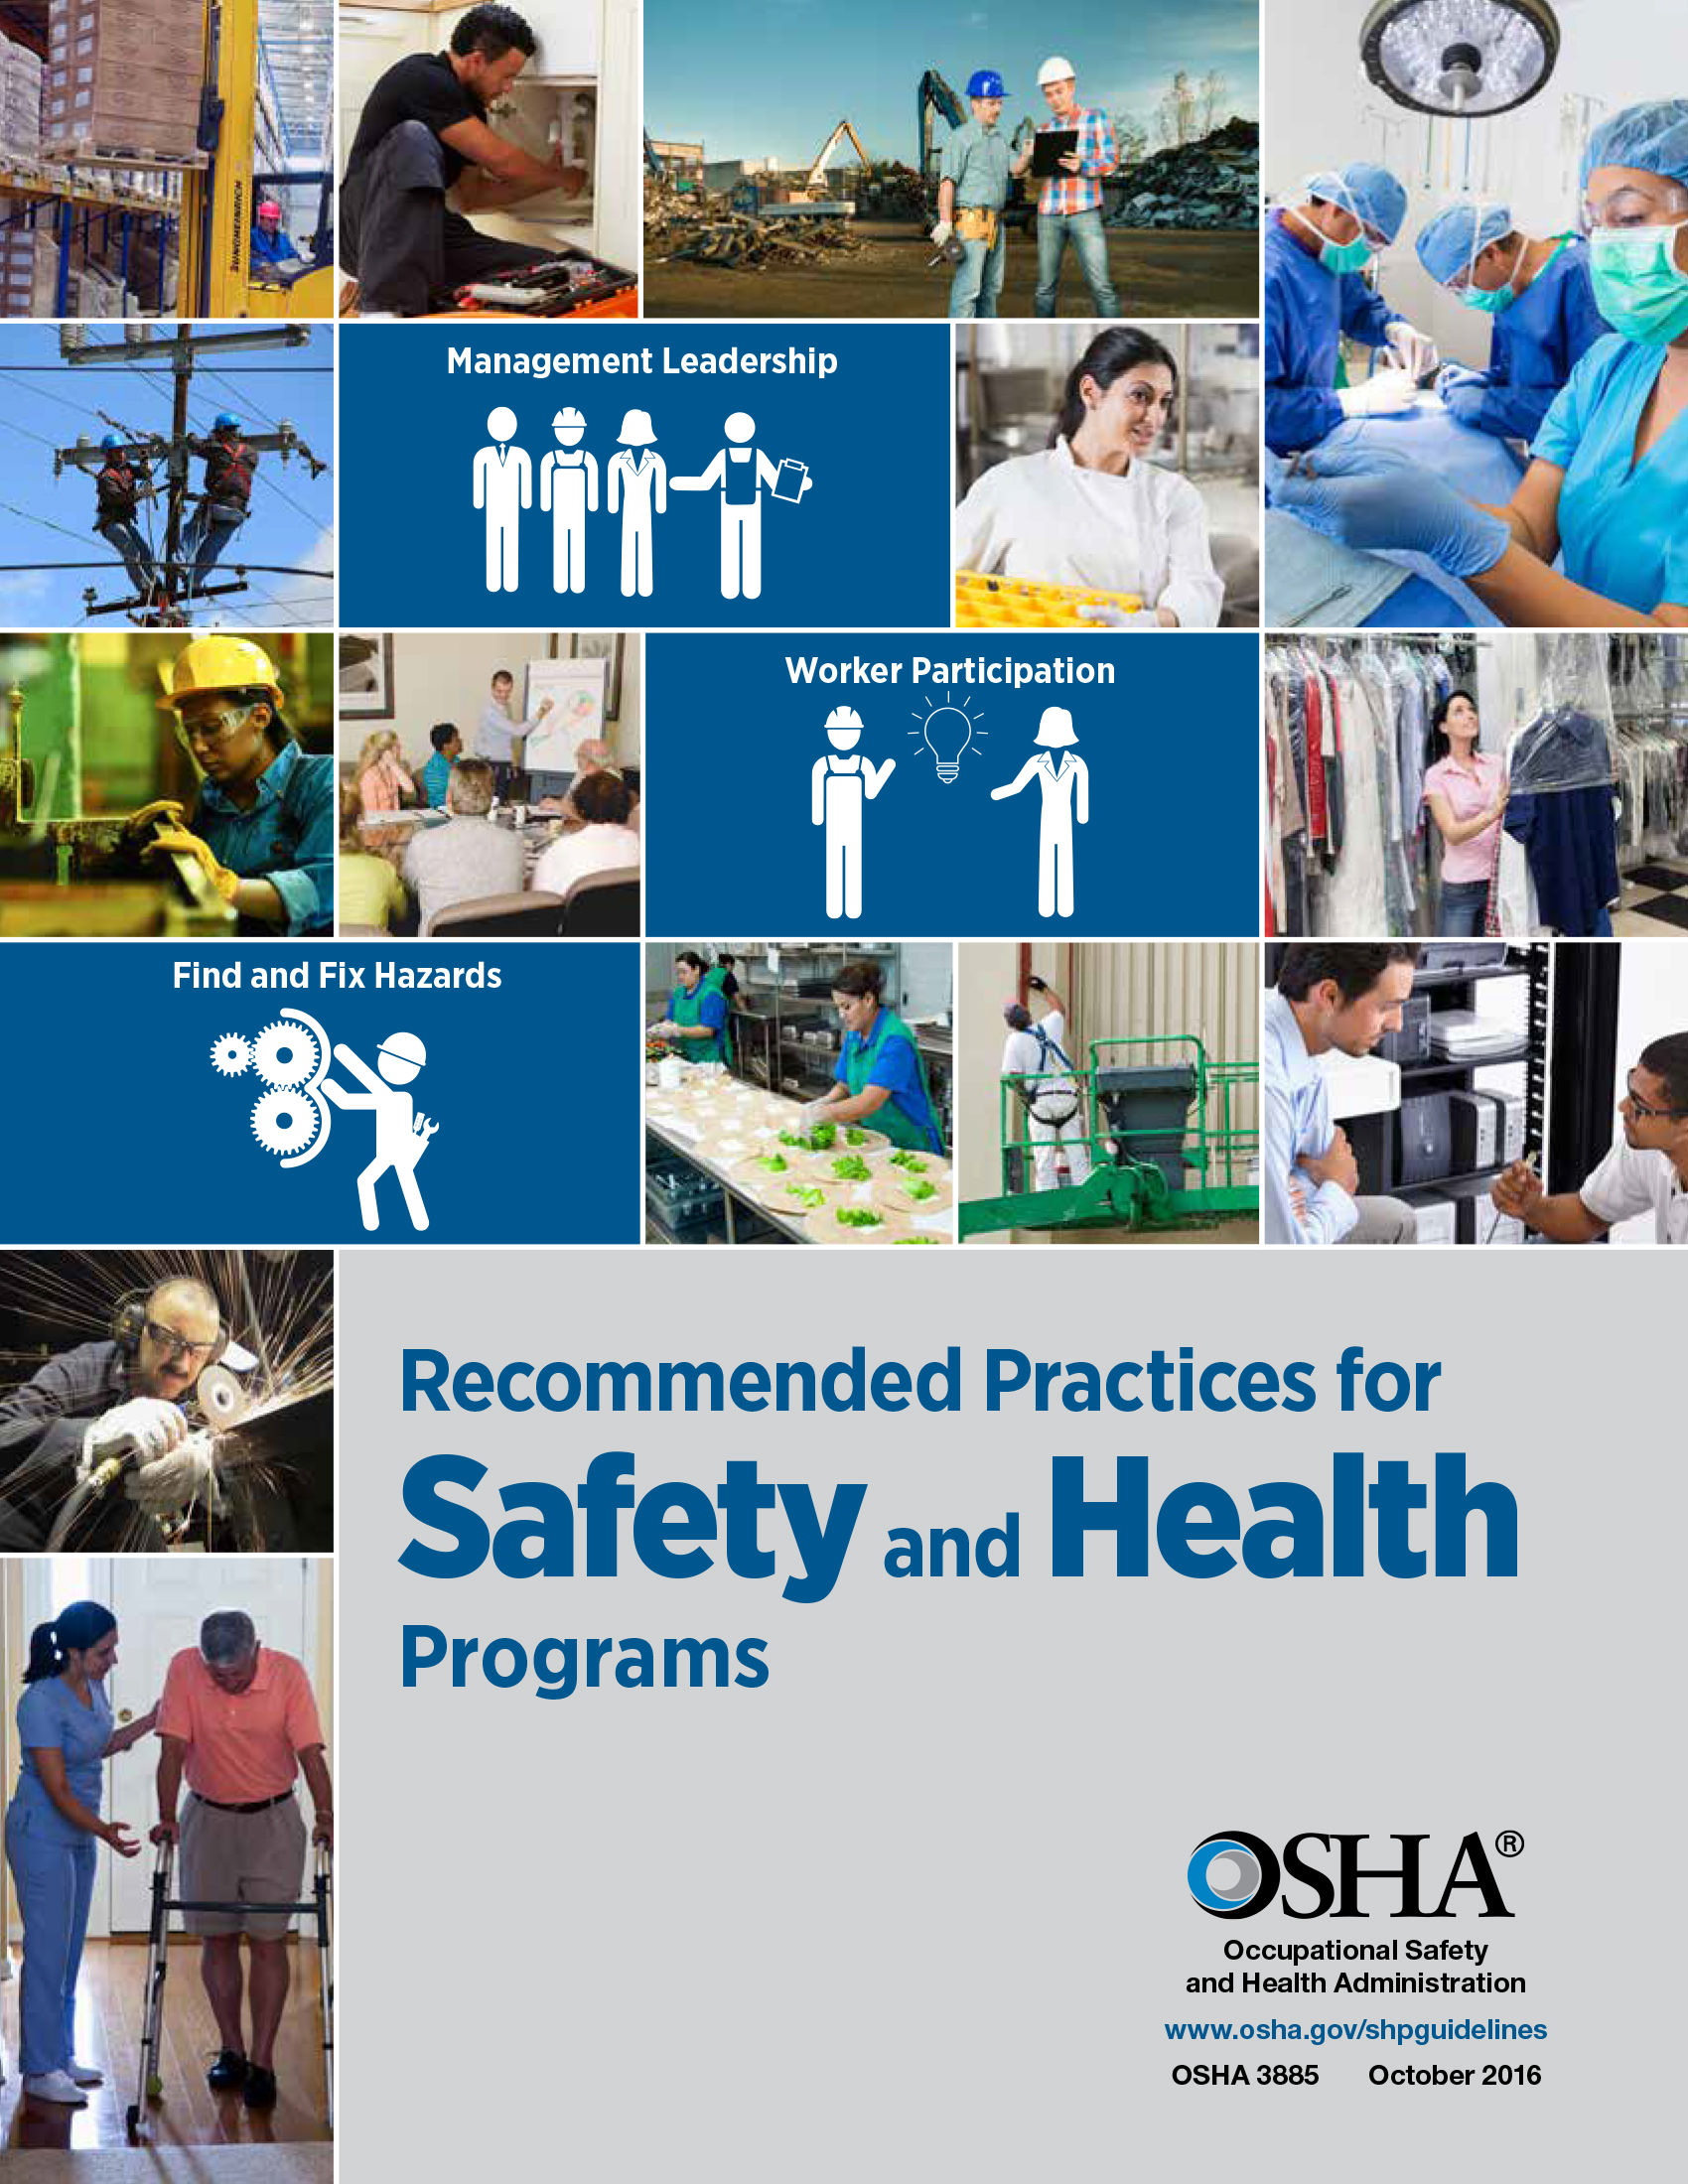 Recommendations for Safety and Health Programs cover